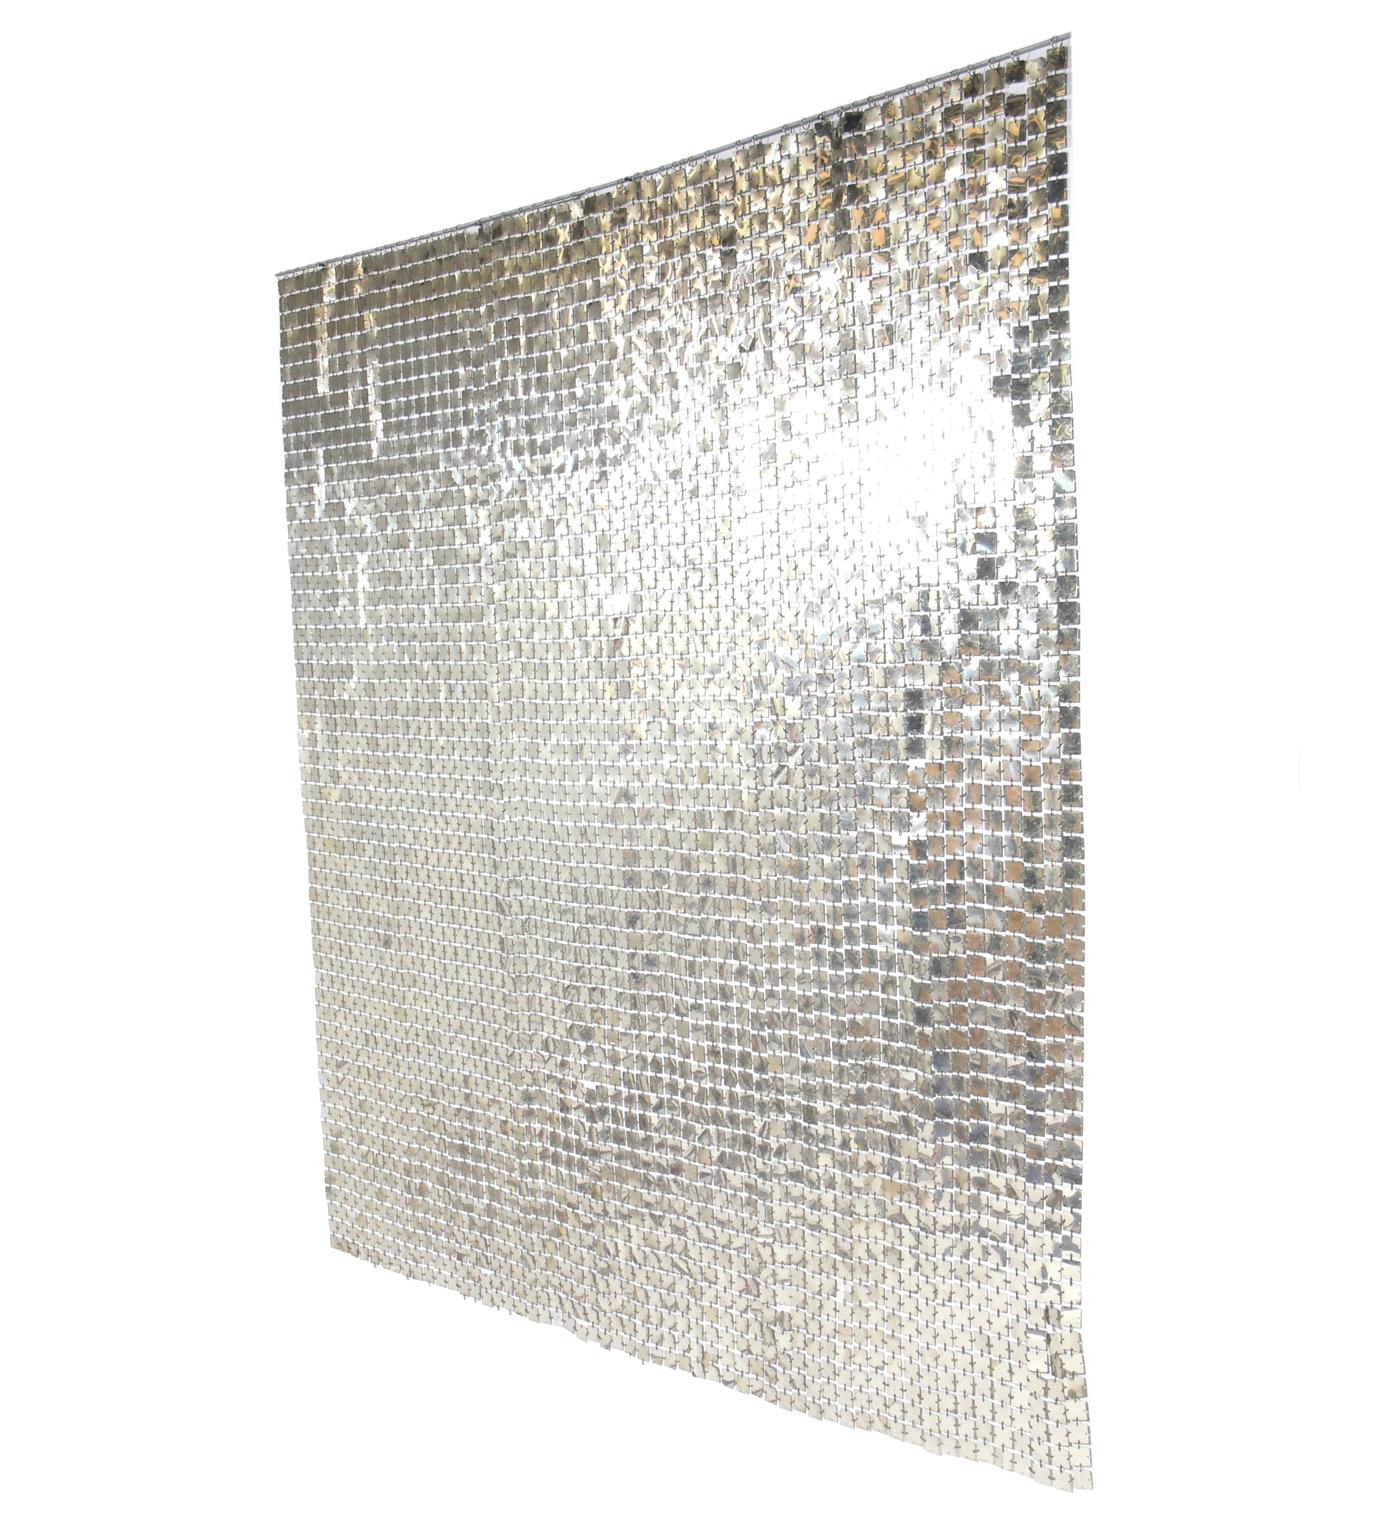 Paco Rabanne space curtain or room divider, French, circa 1970s. It has a wonderful patinated chrome color that looks more platinum in certain light. Looks incredible when lit, as the discs reflect the light and gently move with the slightest breeze.